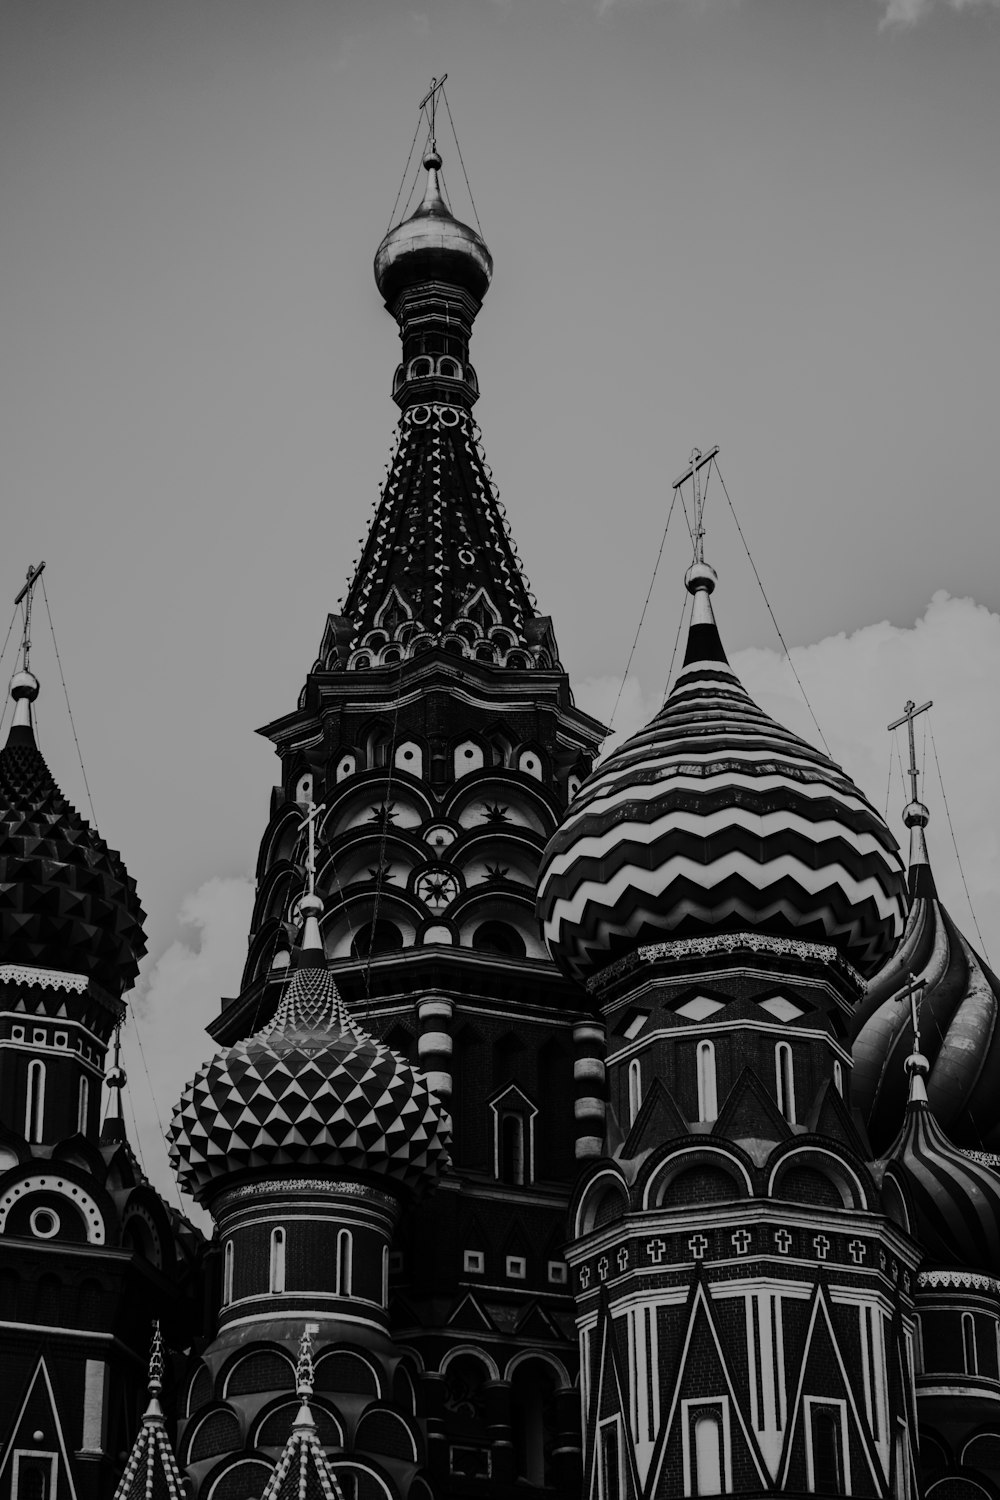 a black and white photo of a building with domes